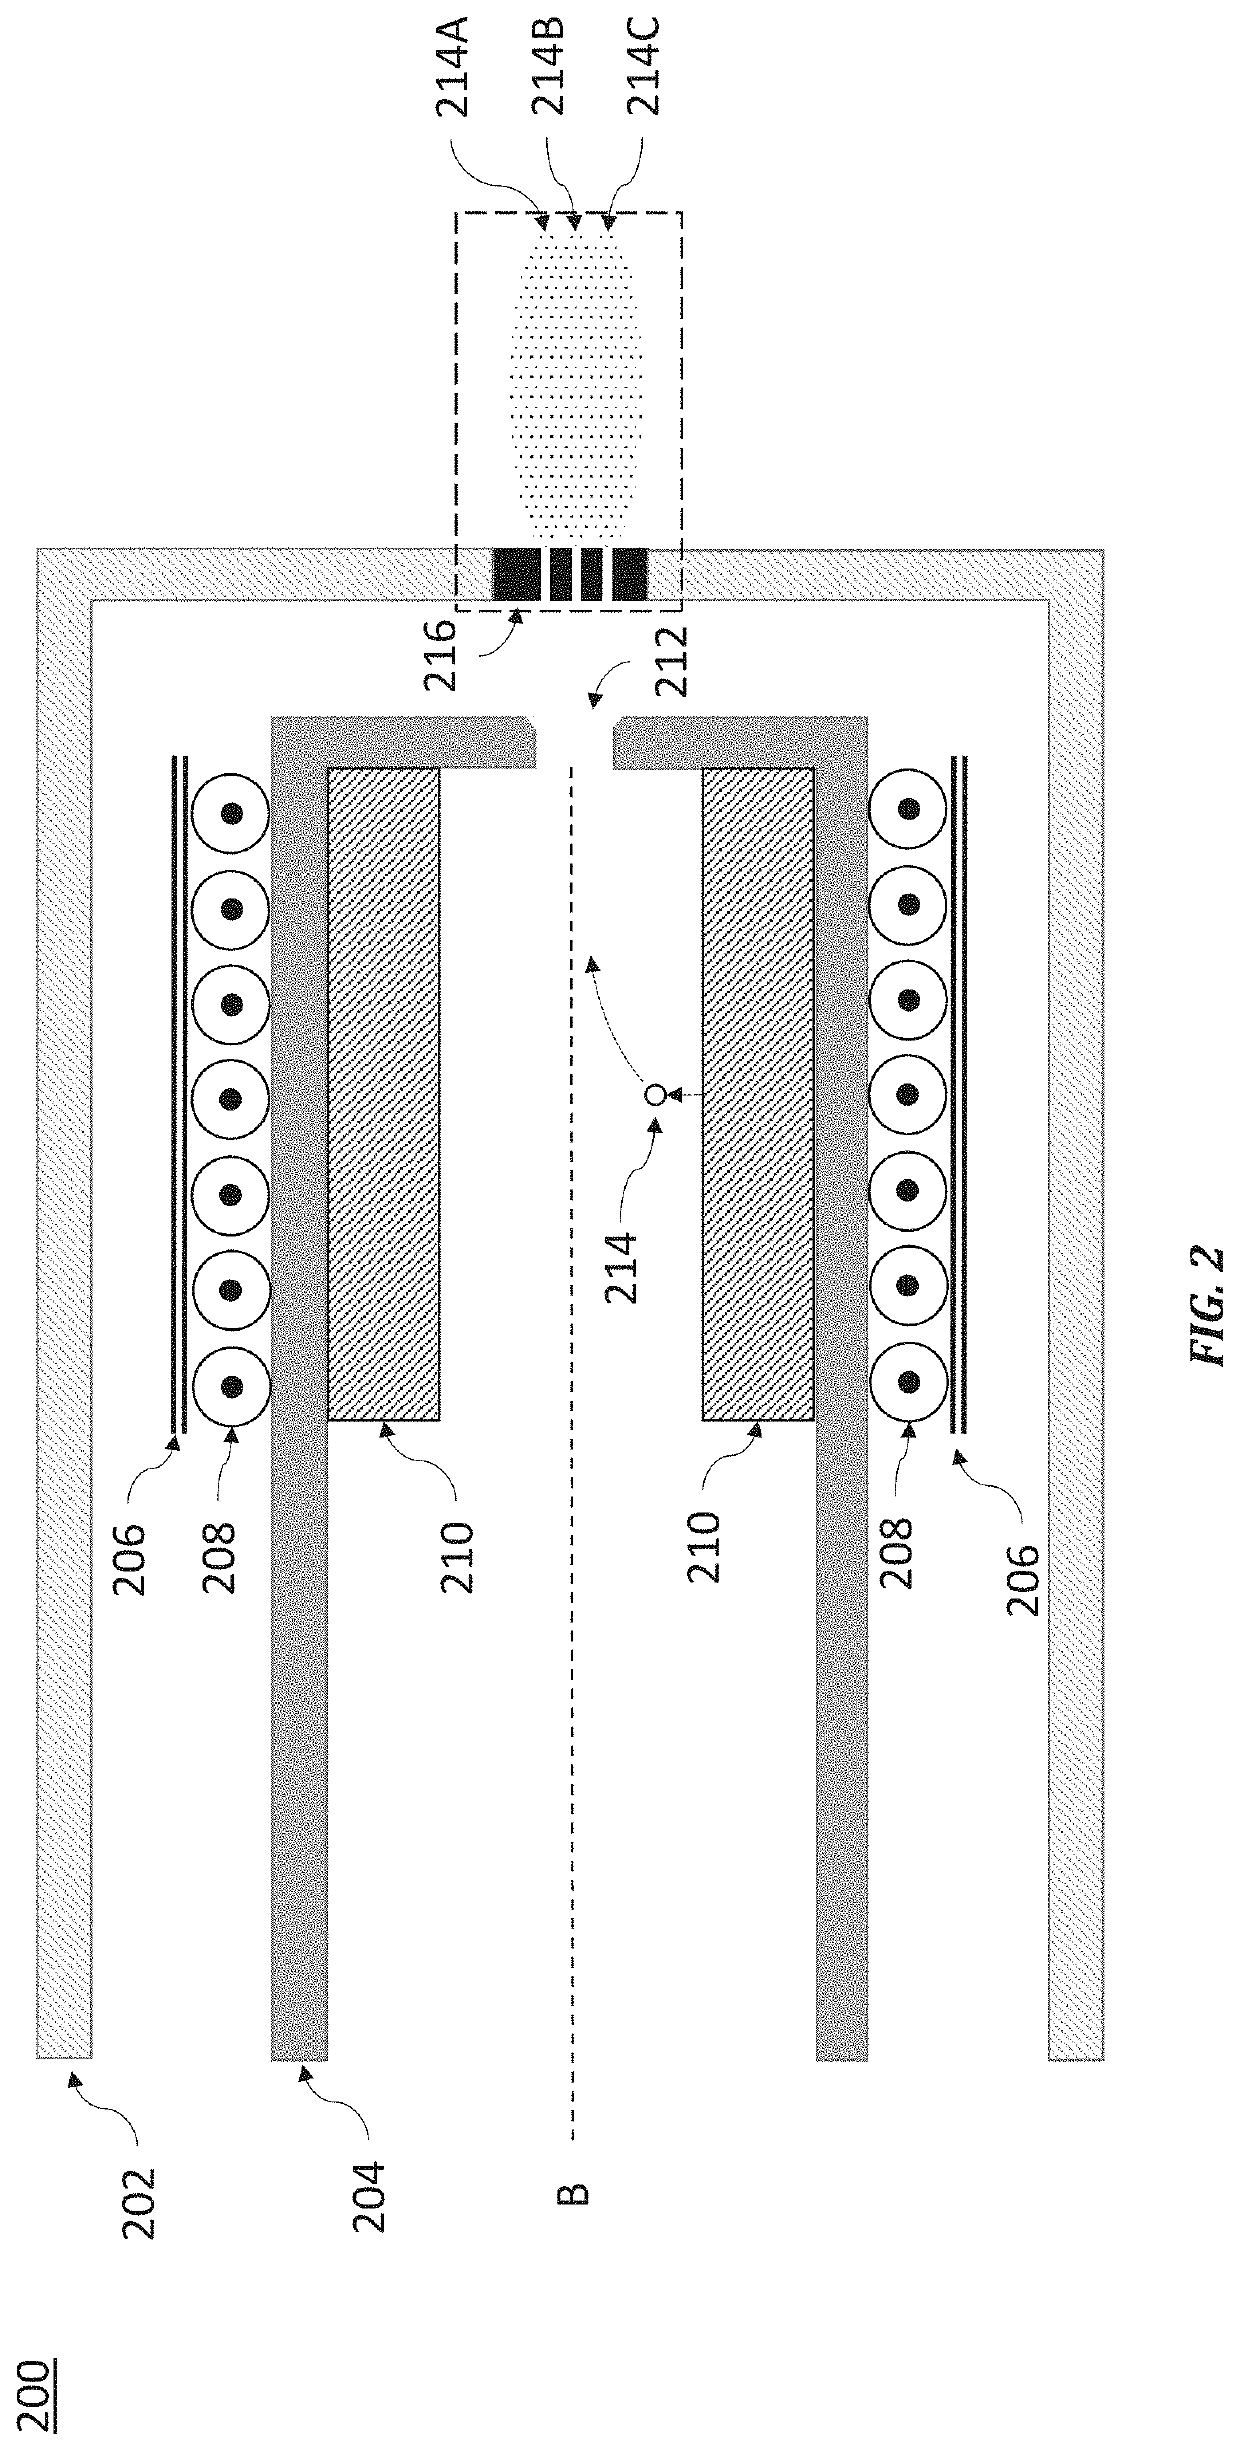 Methods and apparatuses for emitting electrons from a hollow cathode